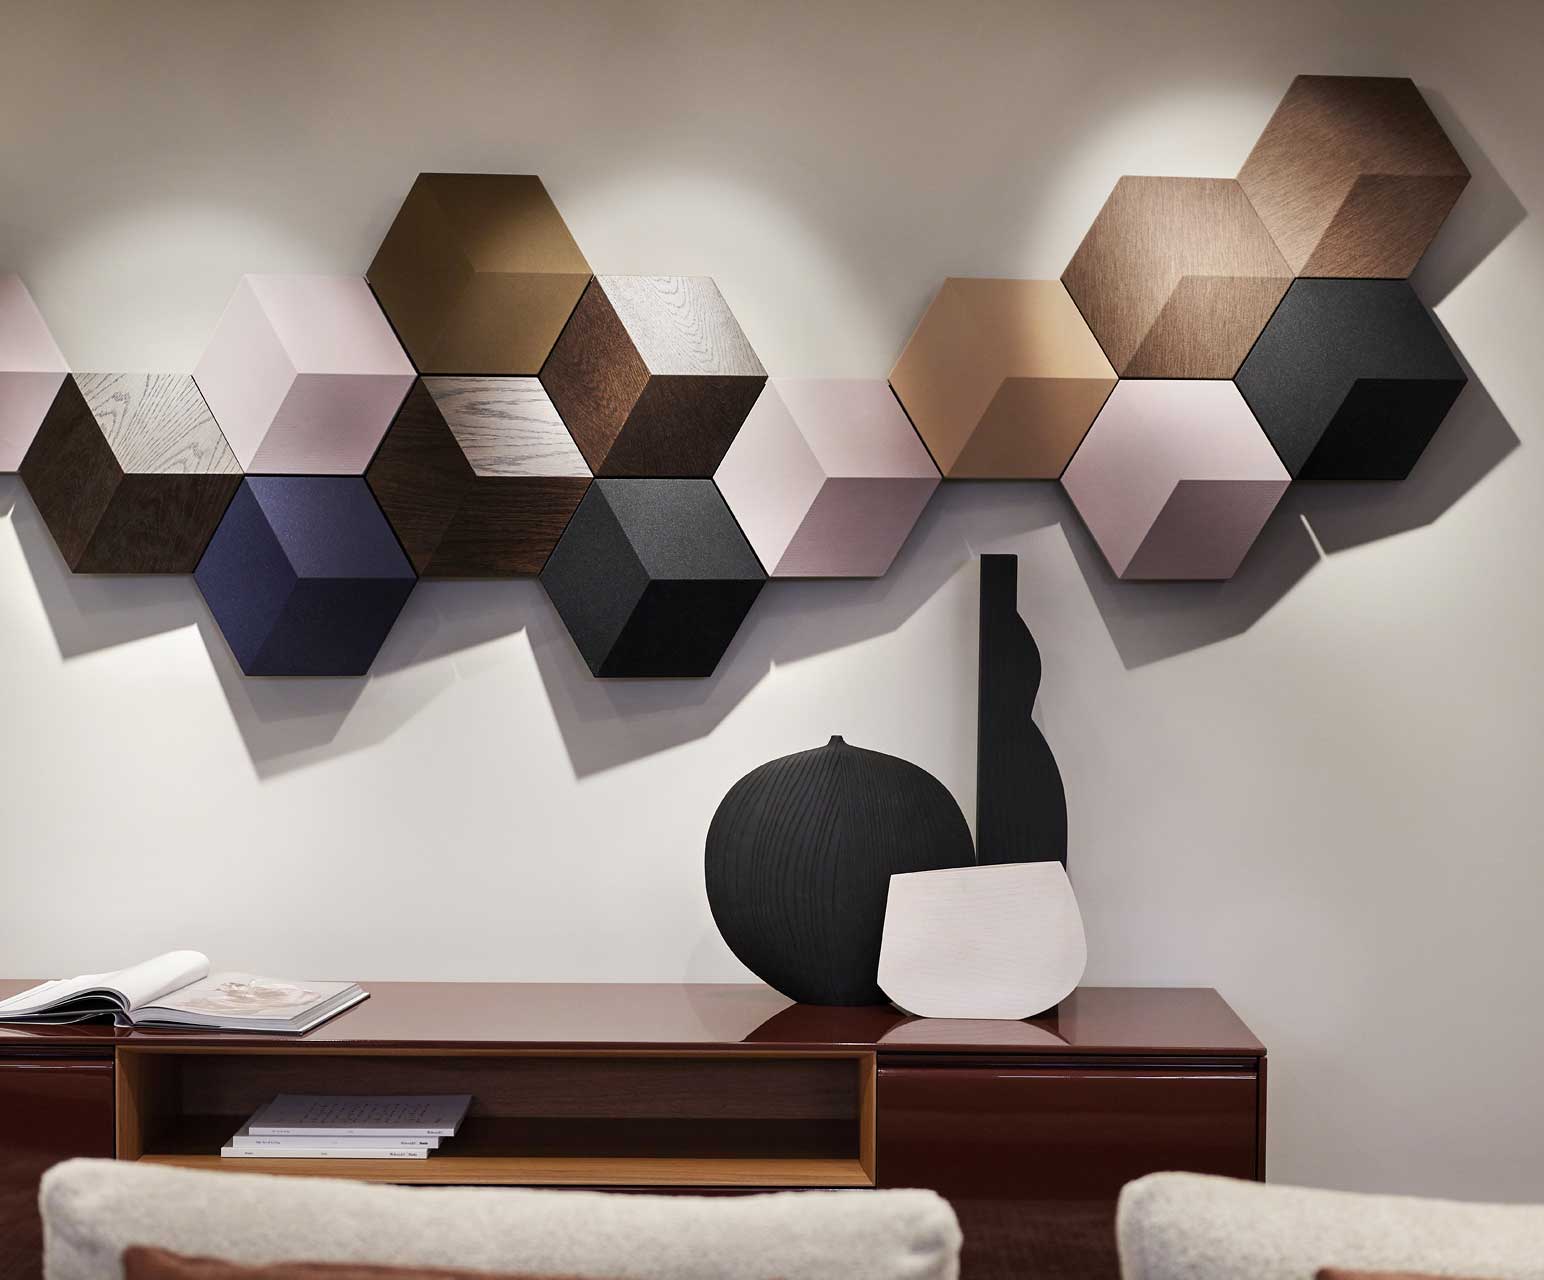 NEW BANG & OLUFSEN LIFESTYLE SHOWROOM DIALS UP THE STYLE WITH HELP FROM CASA DESIGN GROUP AND MOLTENI&C